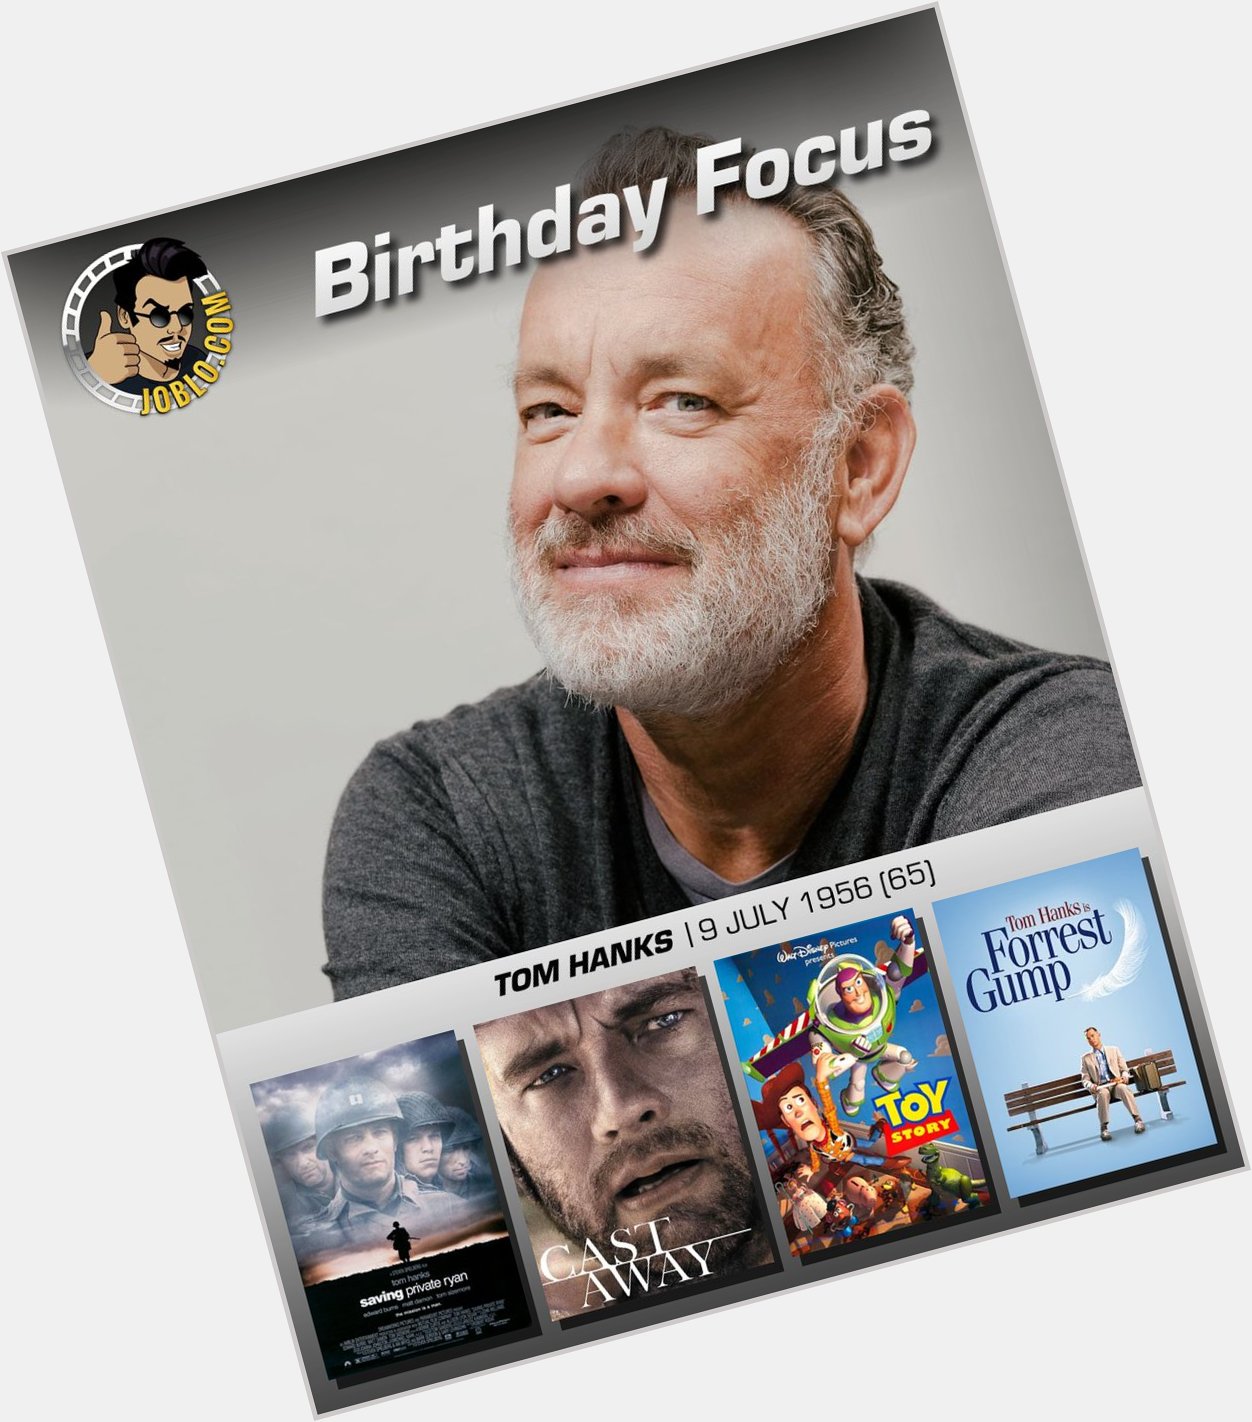 Wishing a very happy 65th birthday to Tom Hanks!

What\s your favorite film of his? 